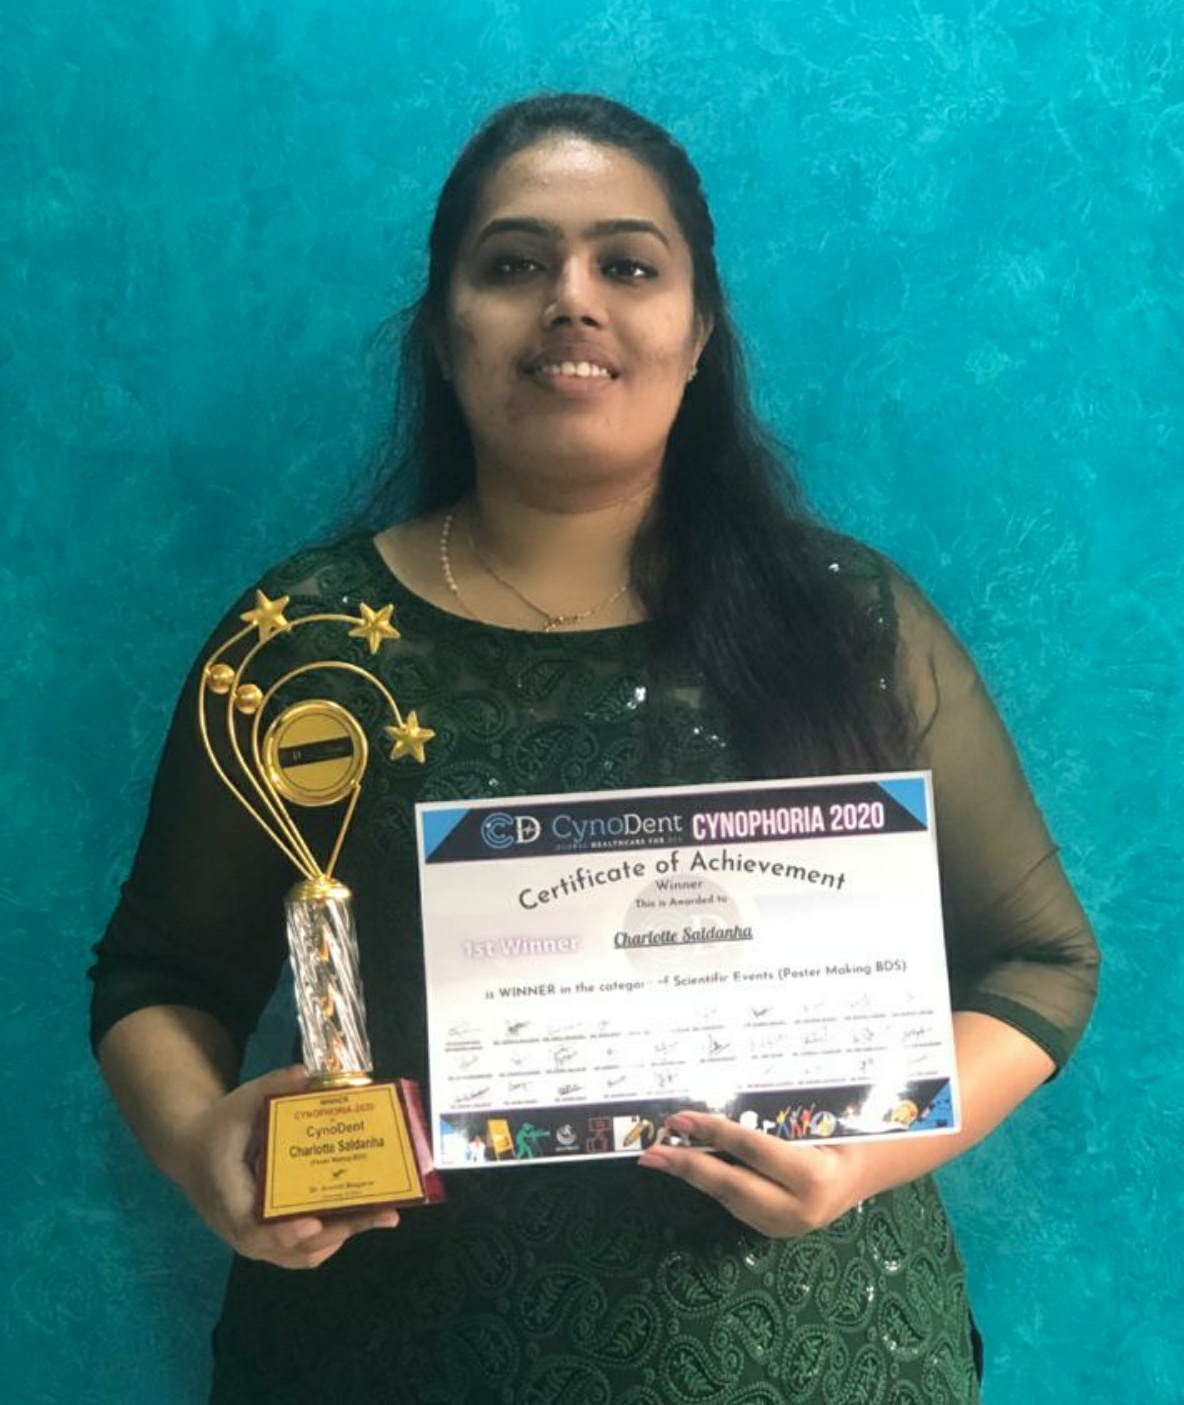 Charlotte Saldanha : 1st Prize won in Poster Making Competition